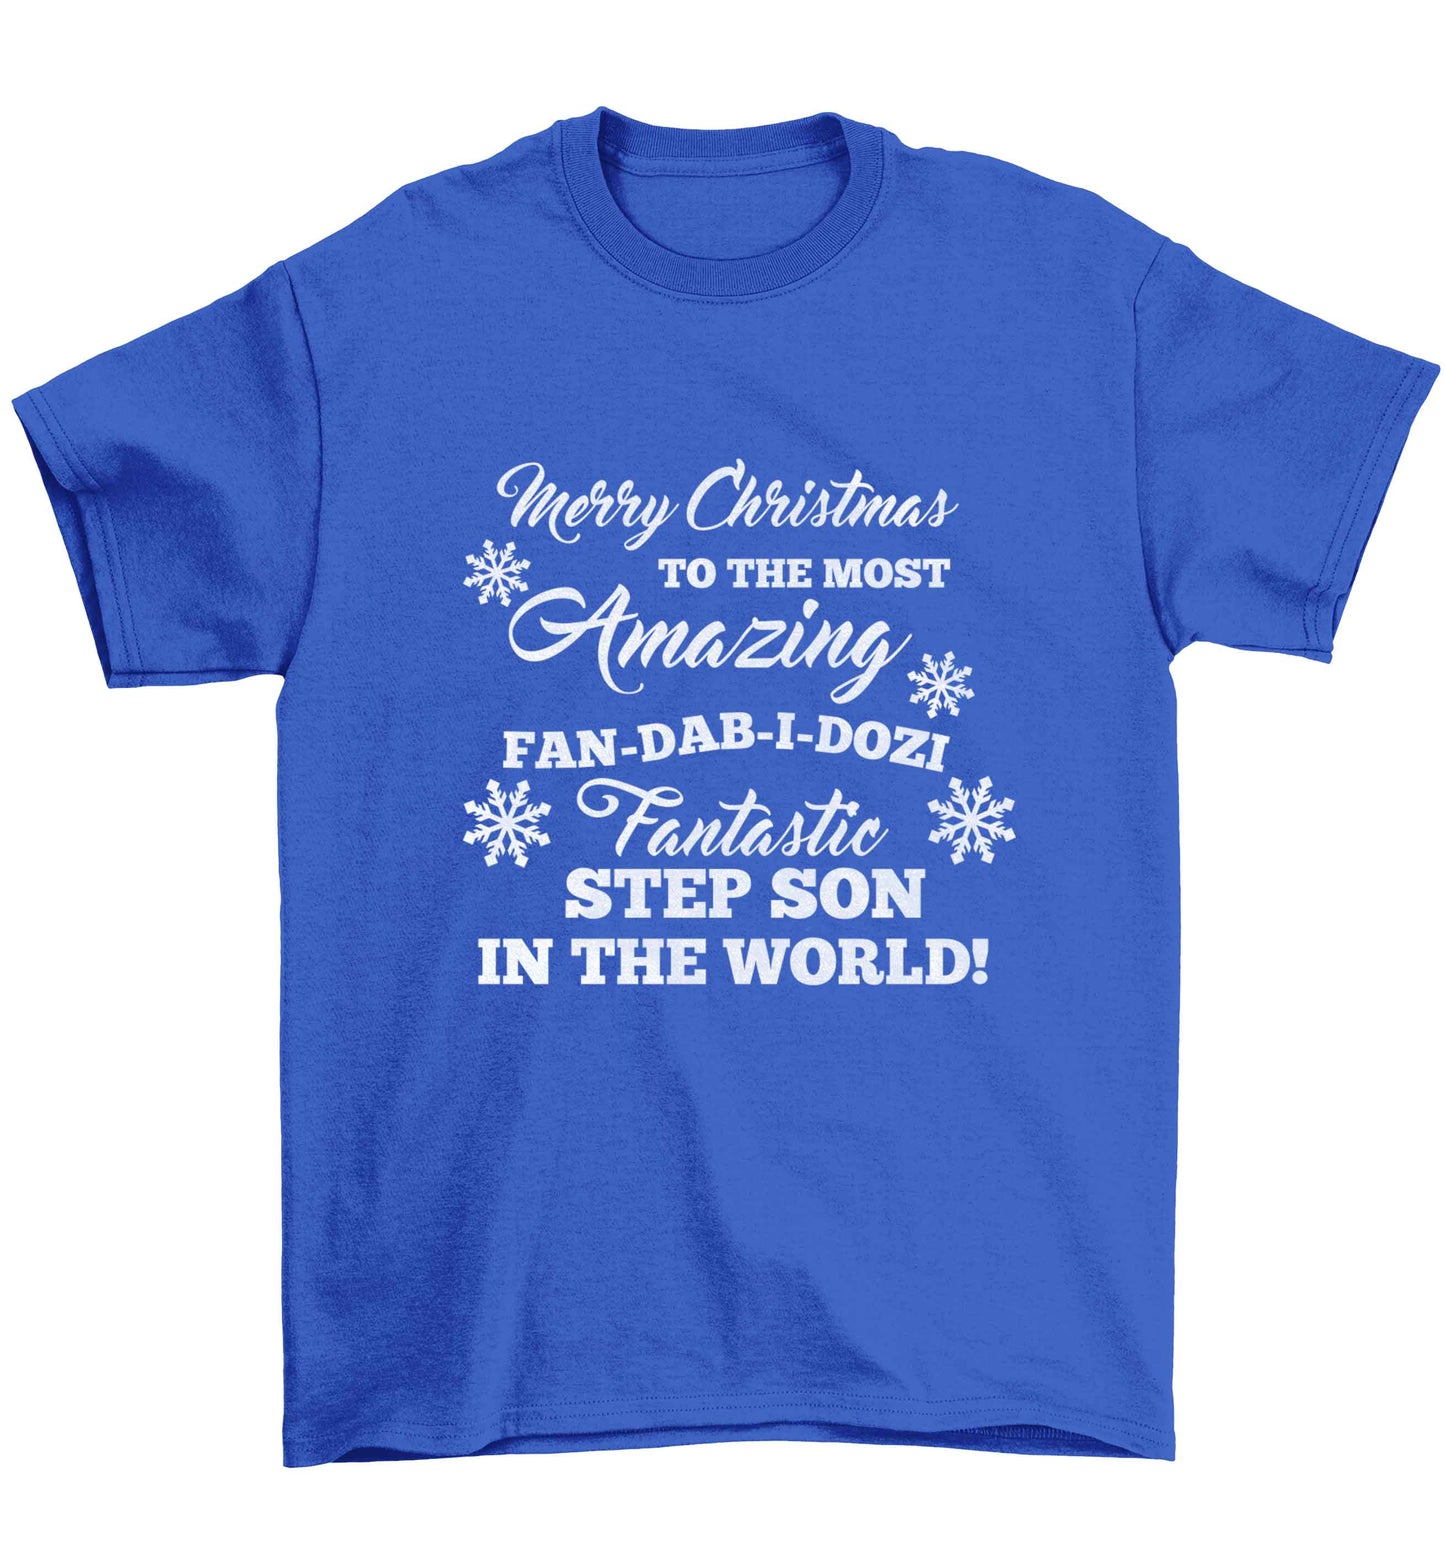 Merry Christmas to the most amazing fan-dab-i-dozi fantasic Step Son in the world Children's blue Tshirt 12-13 Years